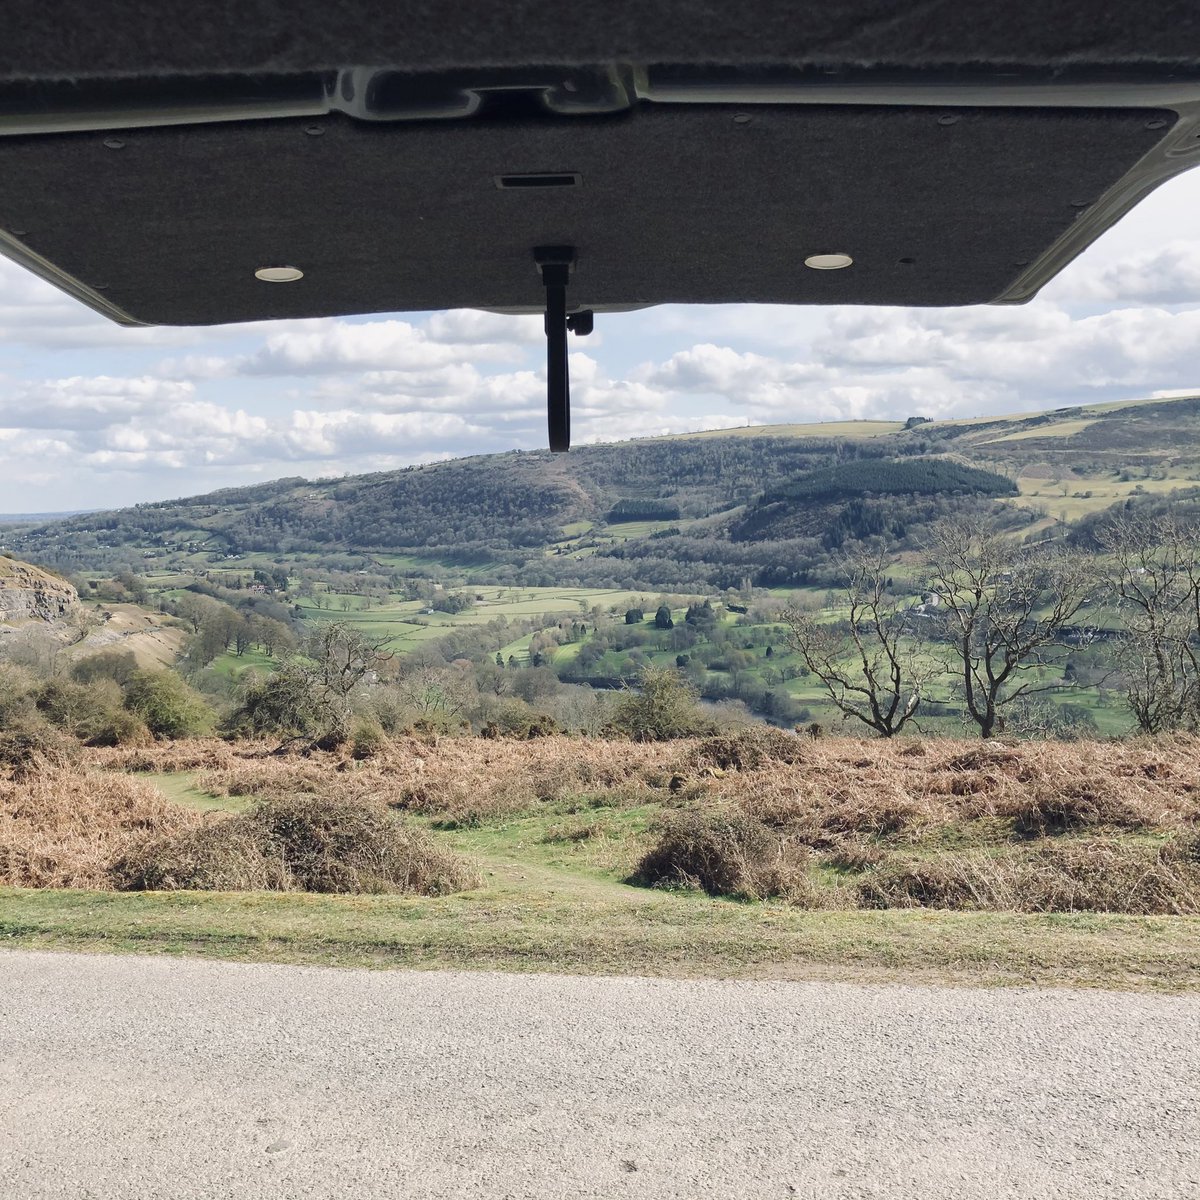 Another brew with a view ☕️
.
.
#brewwithaview #campervan #t5transporter #campervaninterior